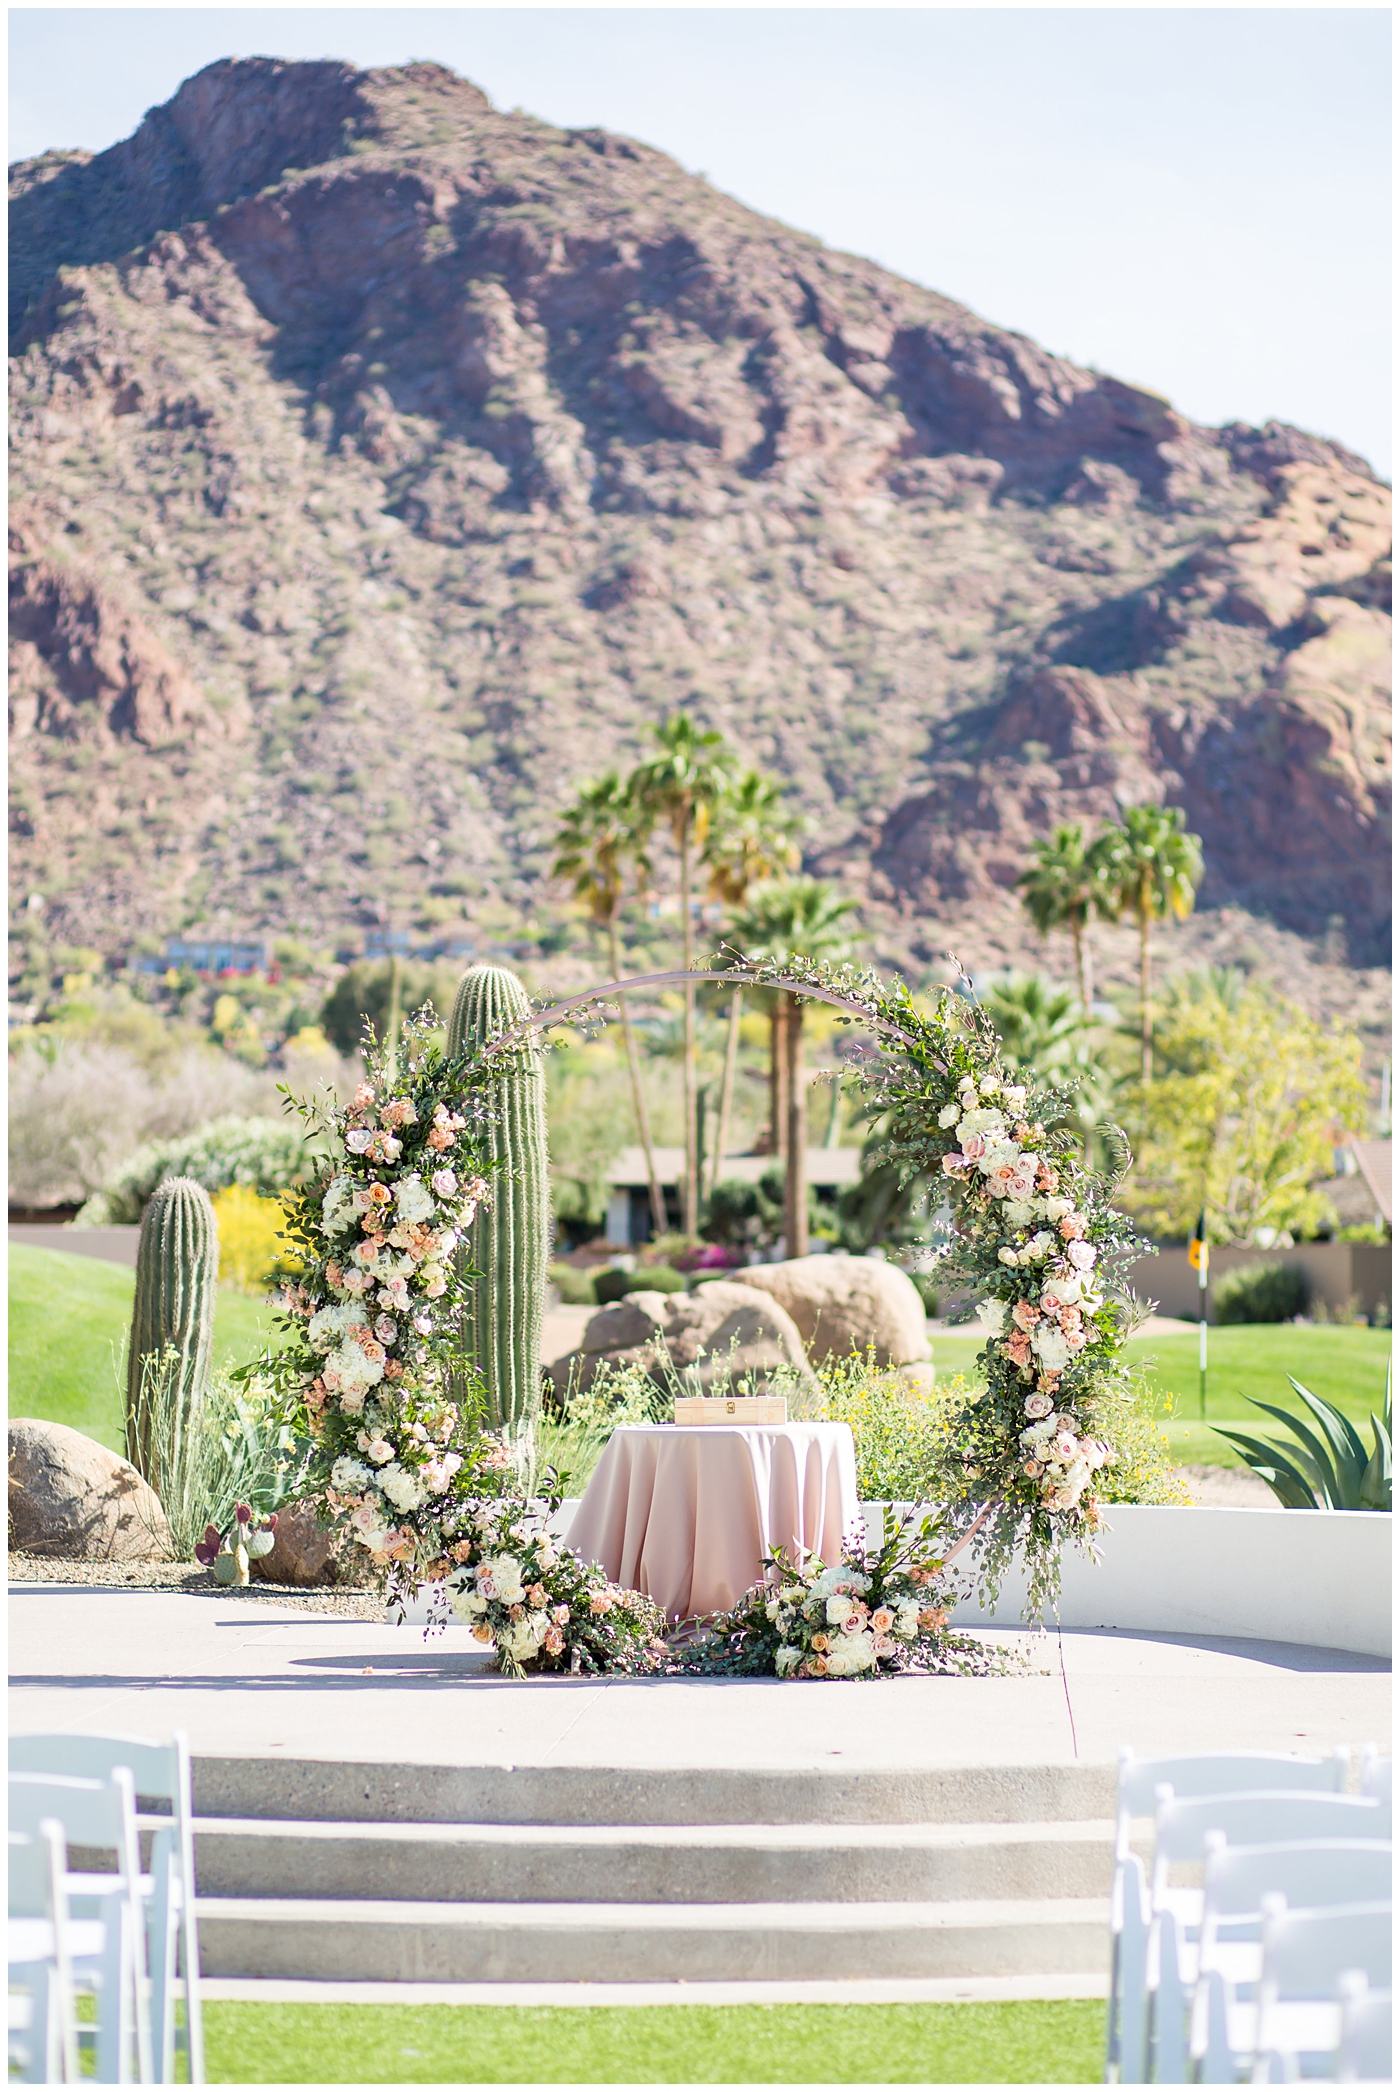 unique circle arch for ceremony with wildflowers in blush and white with greenery at wedding ceremony with mountain in background